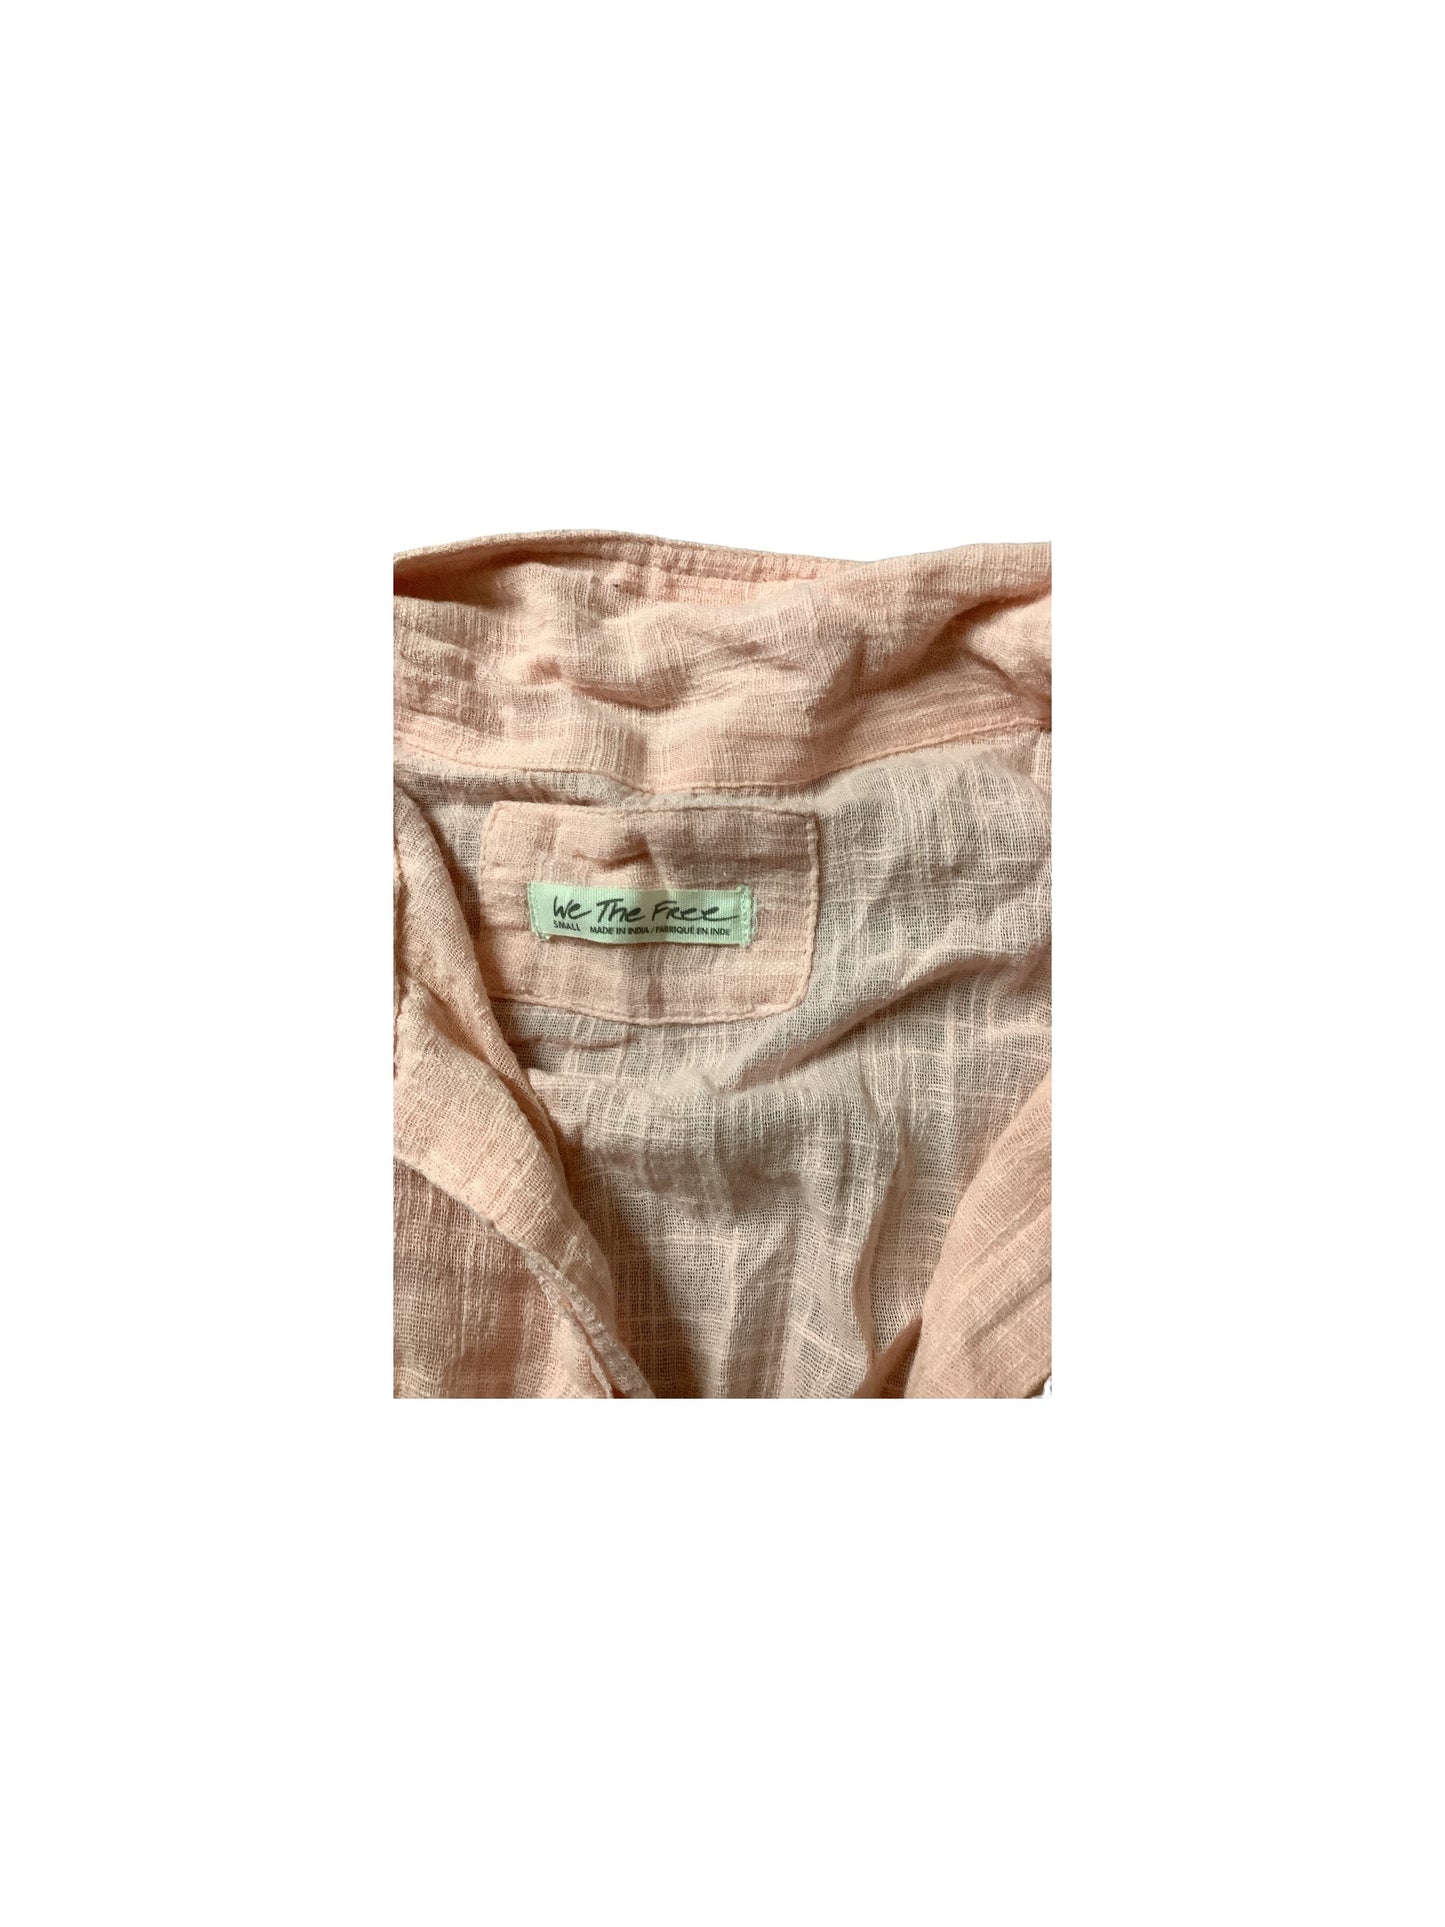 Peach Top Long Sleeve Basic We The Free, Size S